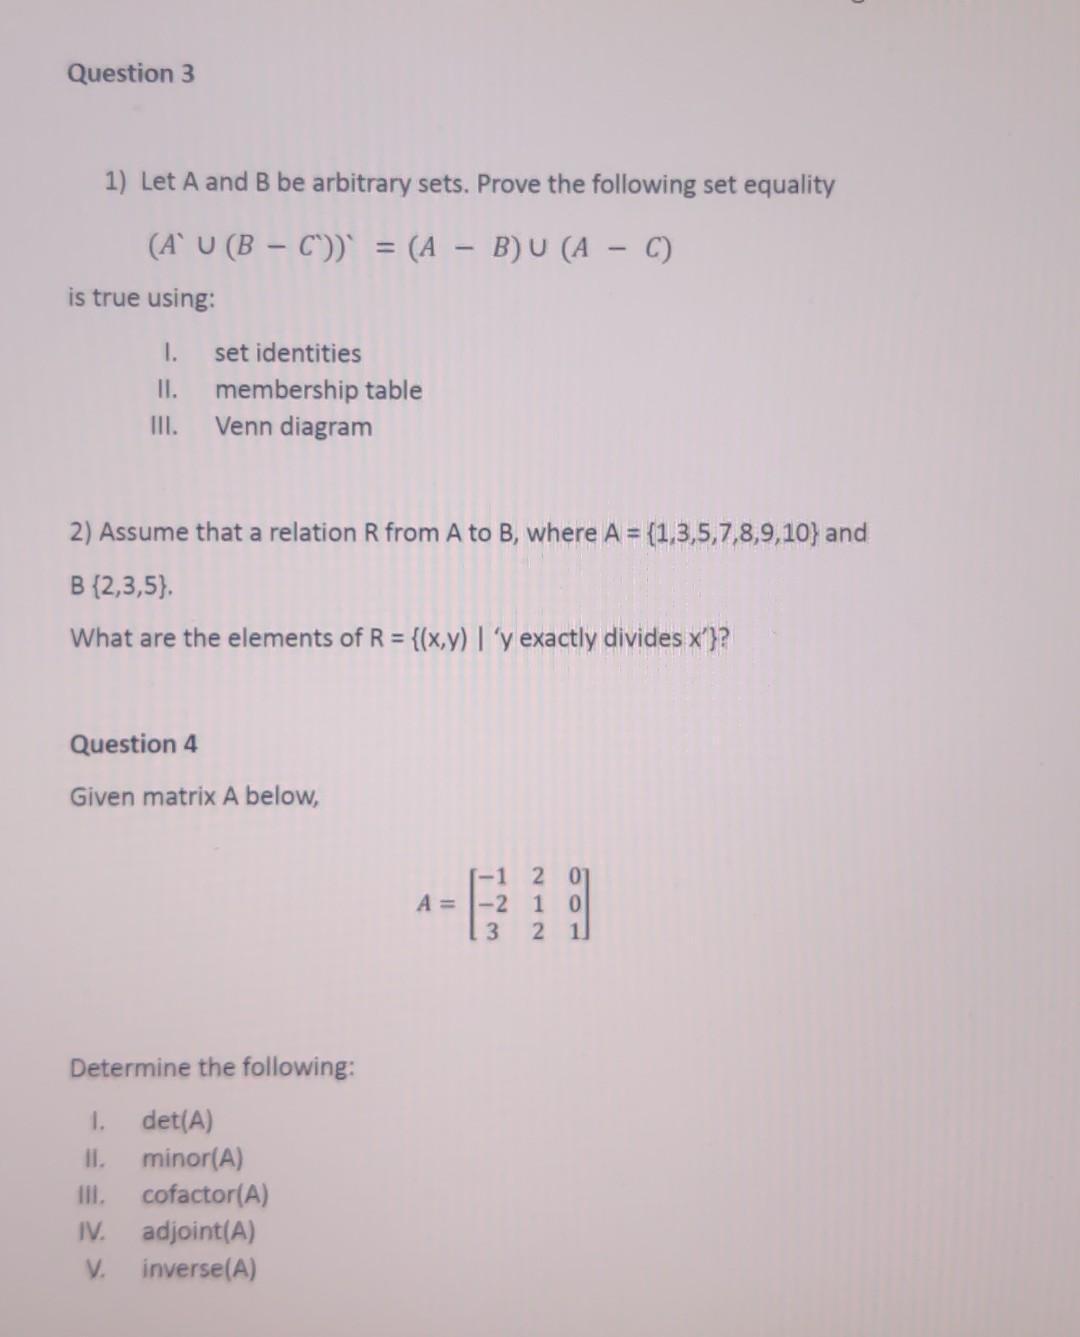 Question 3 1) Let A and B be arbitrary sets. Prove the following set equality (AU (B - C'))` = (A - B) U (A -